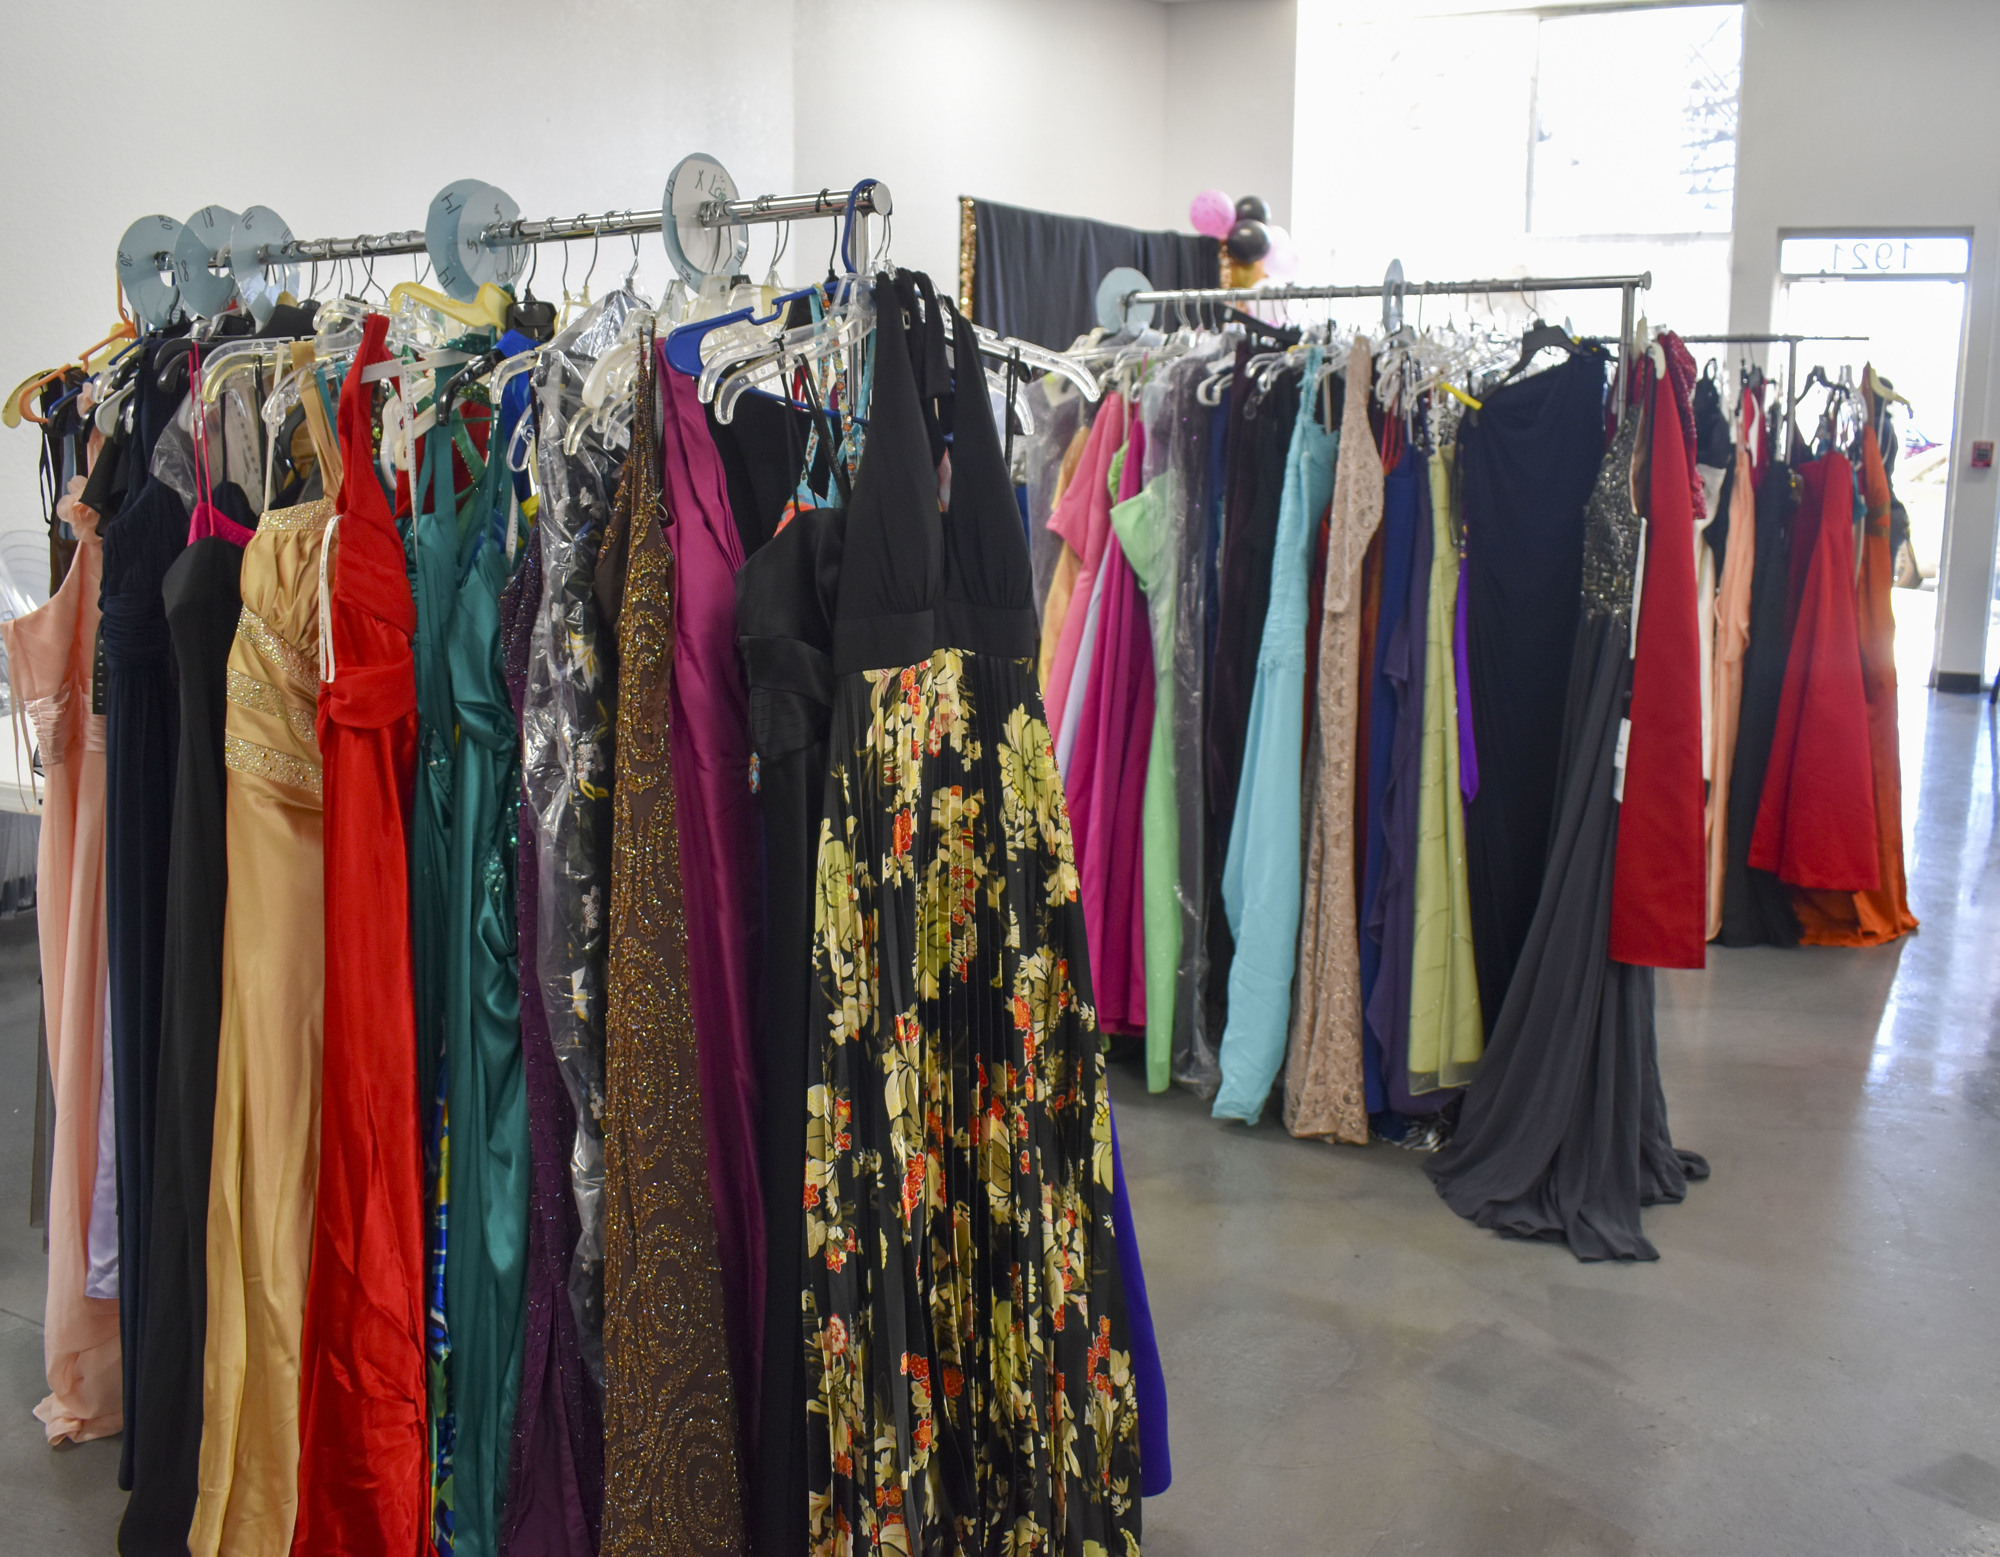 The dresses were a range of sizes, styles and colors.